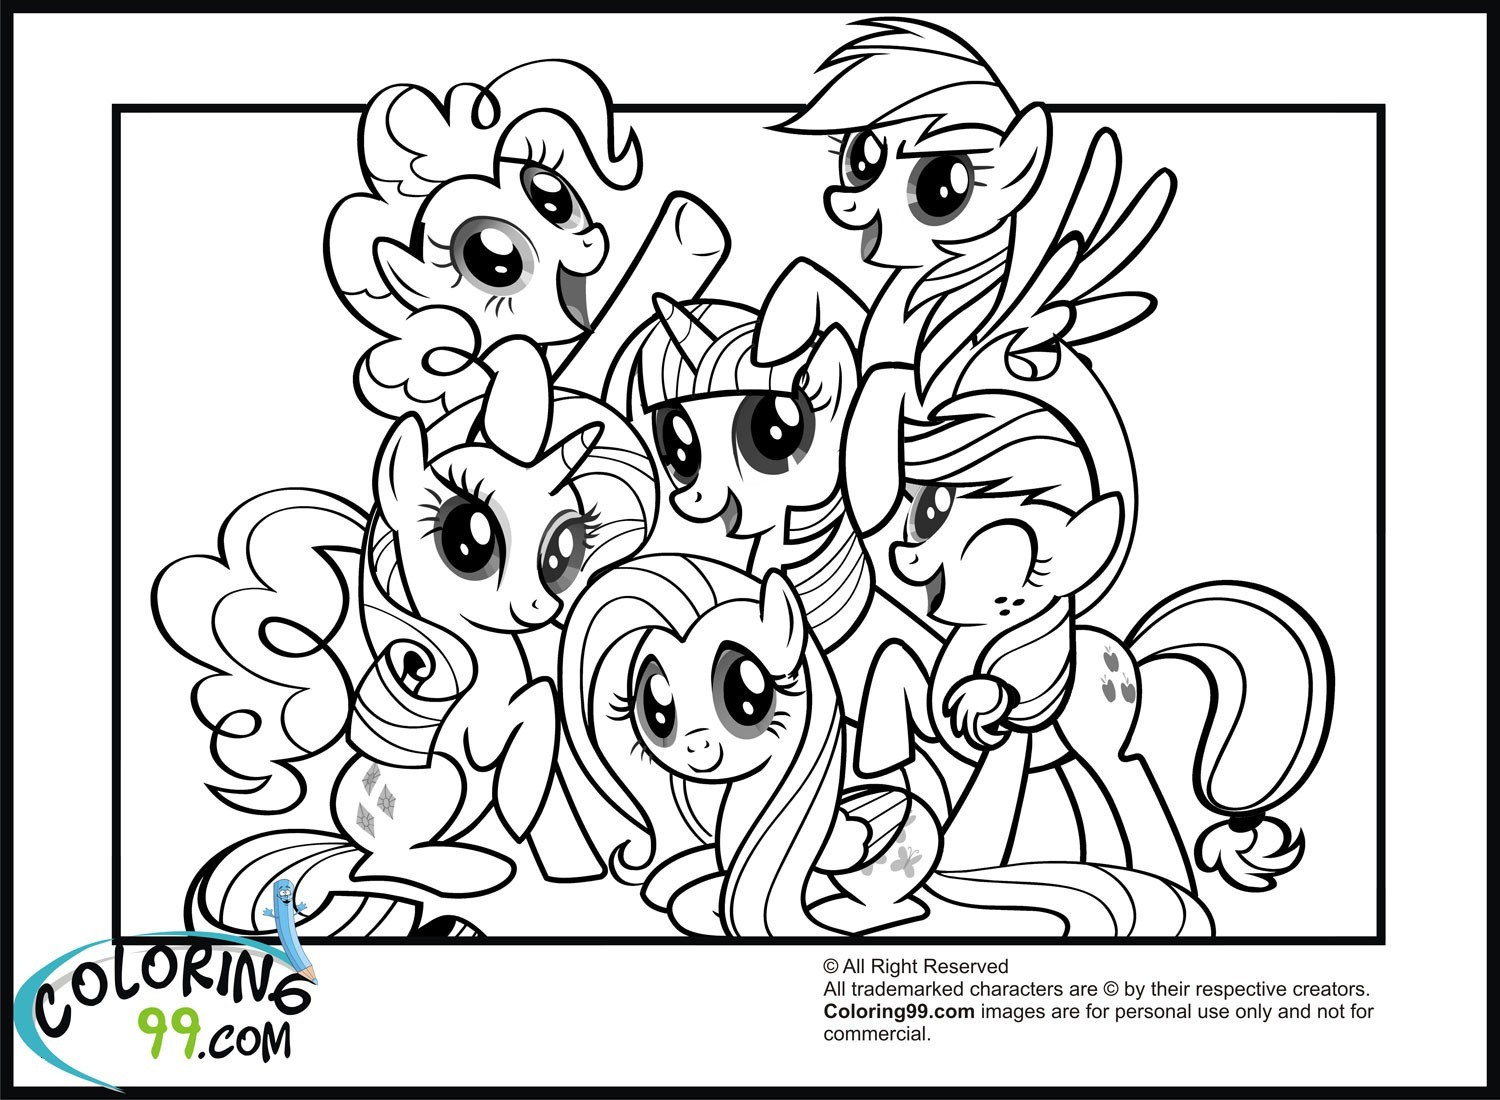 Coloring Pages My Little Pony Friendship is Magic